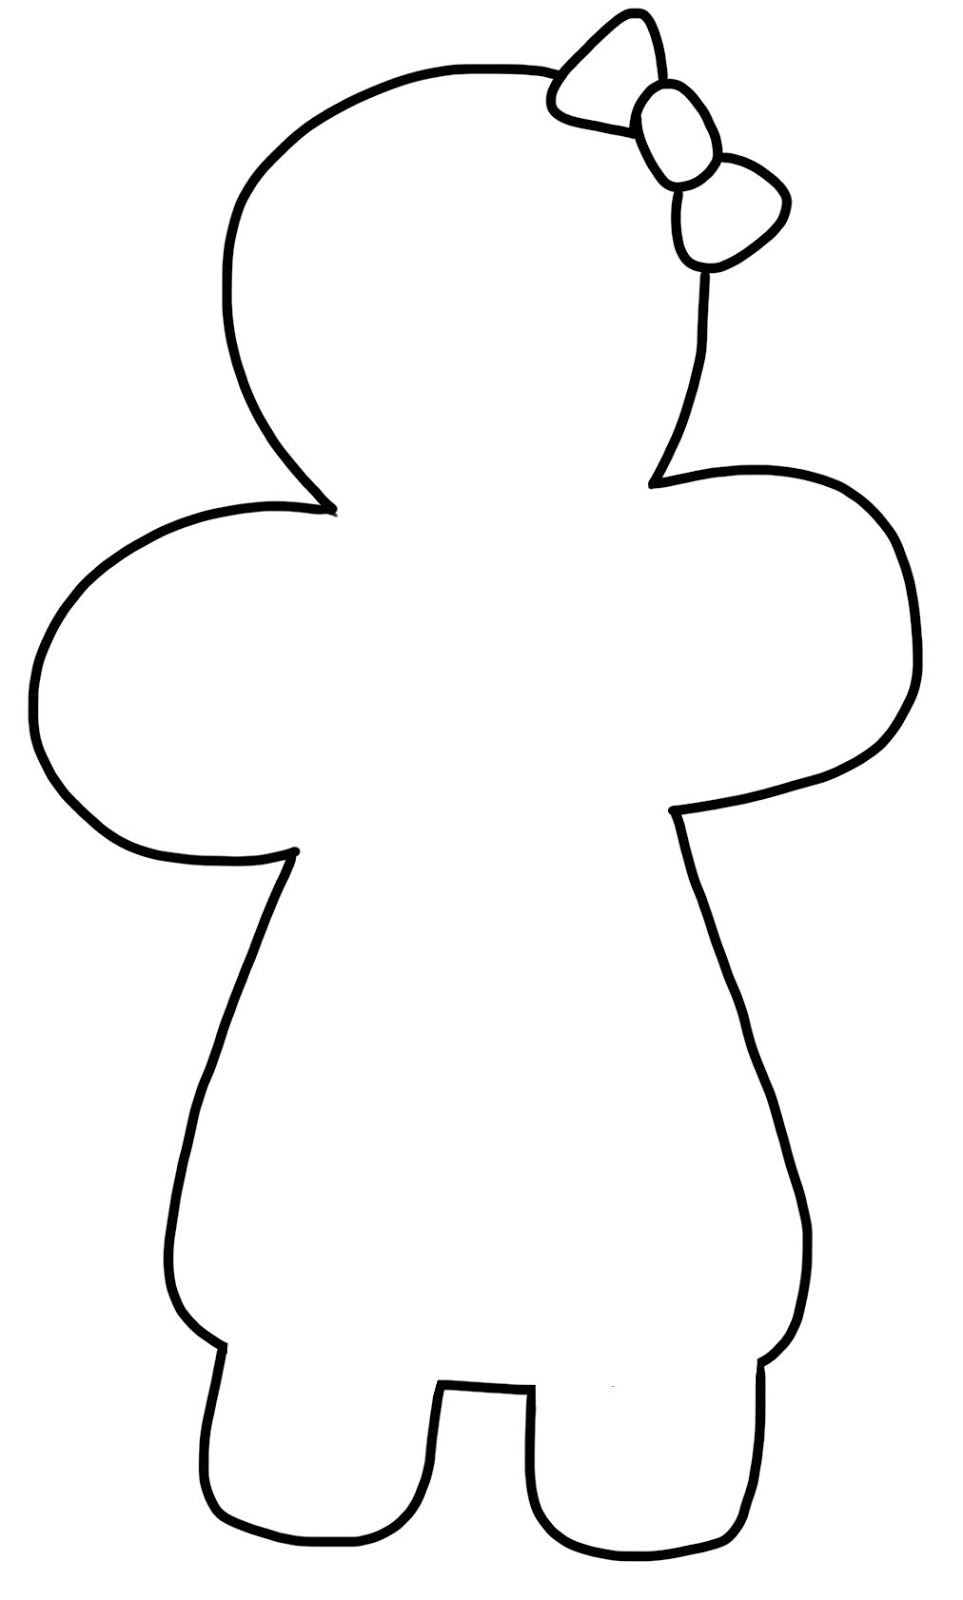 Girl Outline Clipart   Clipart Panda   Free Clipart Images